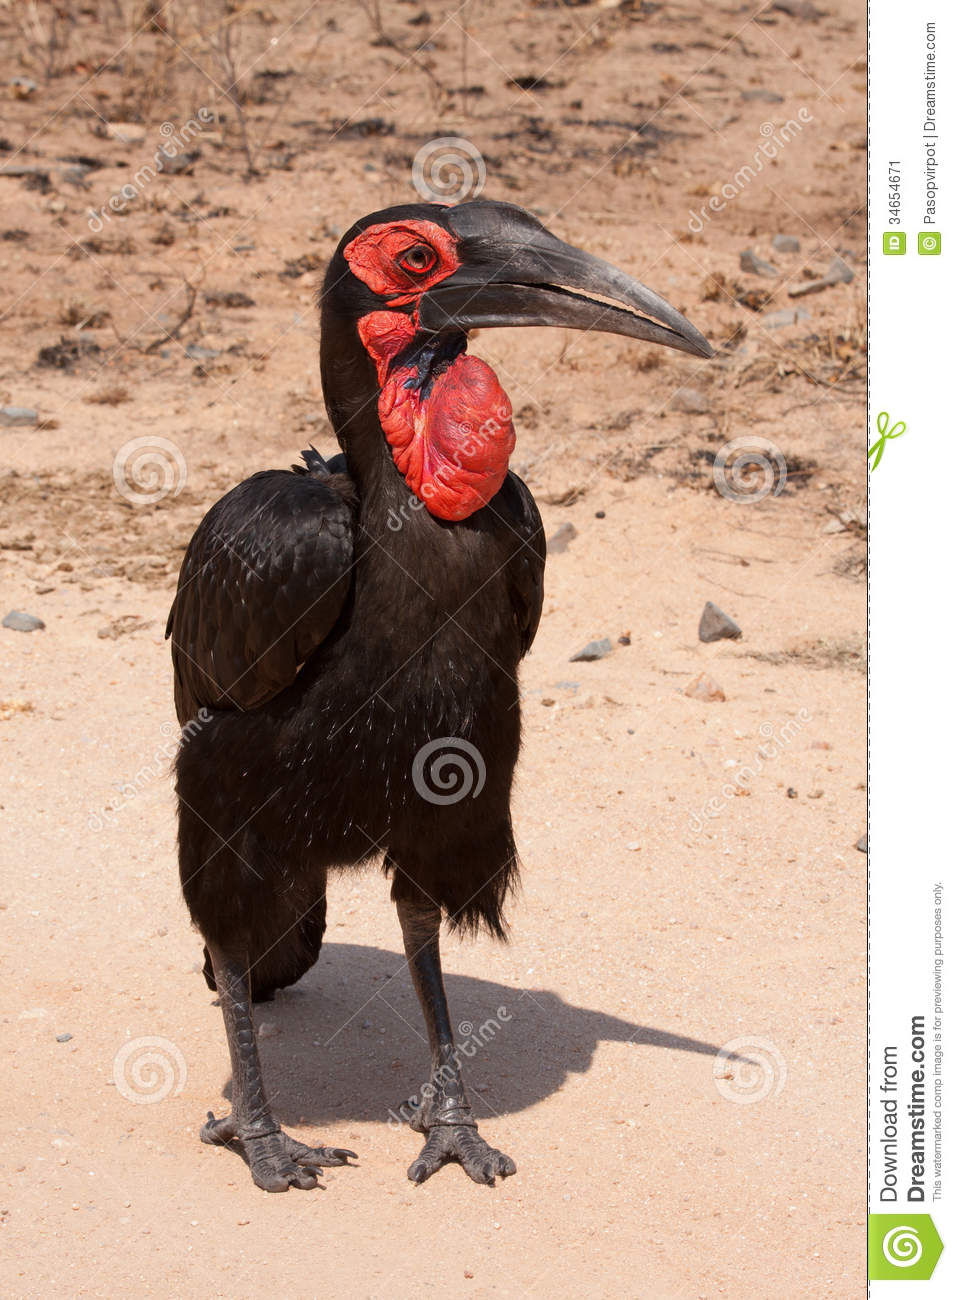 Southern Ground Hornbill clipart #13, Download drawings